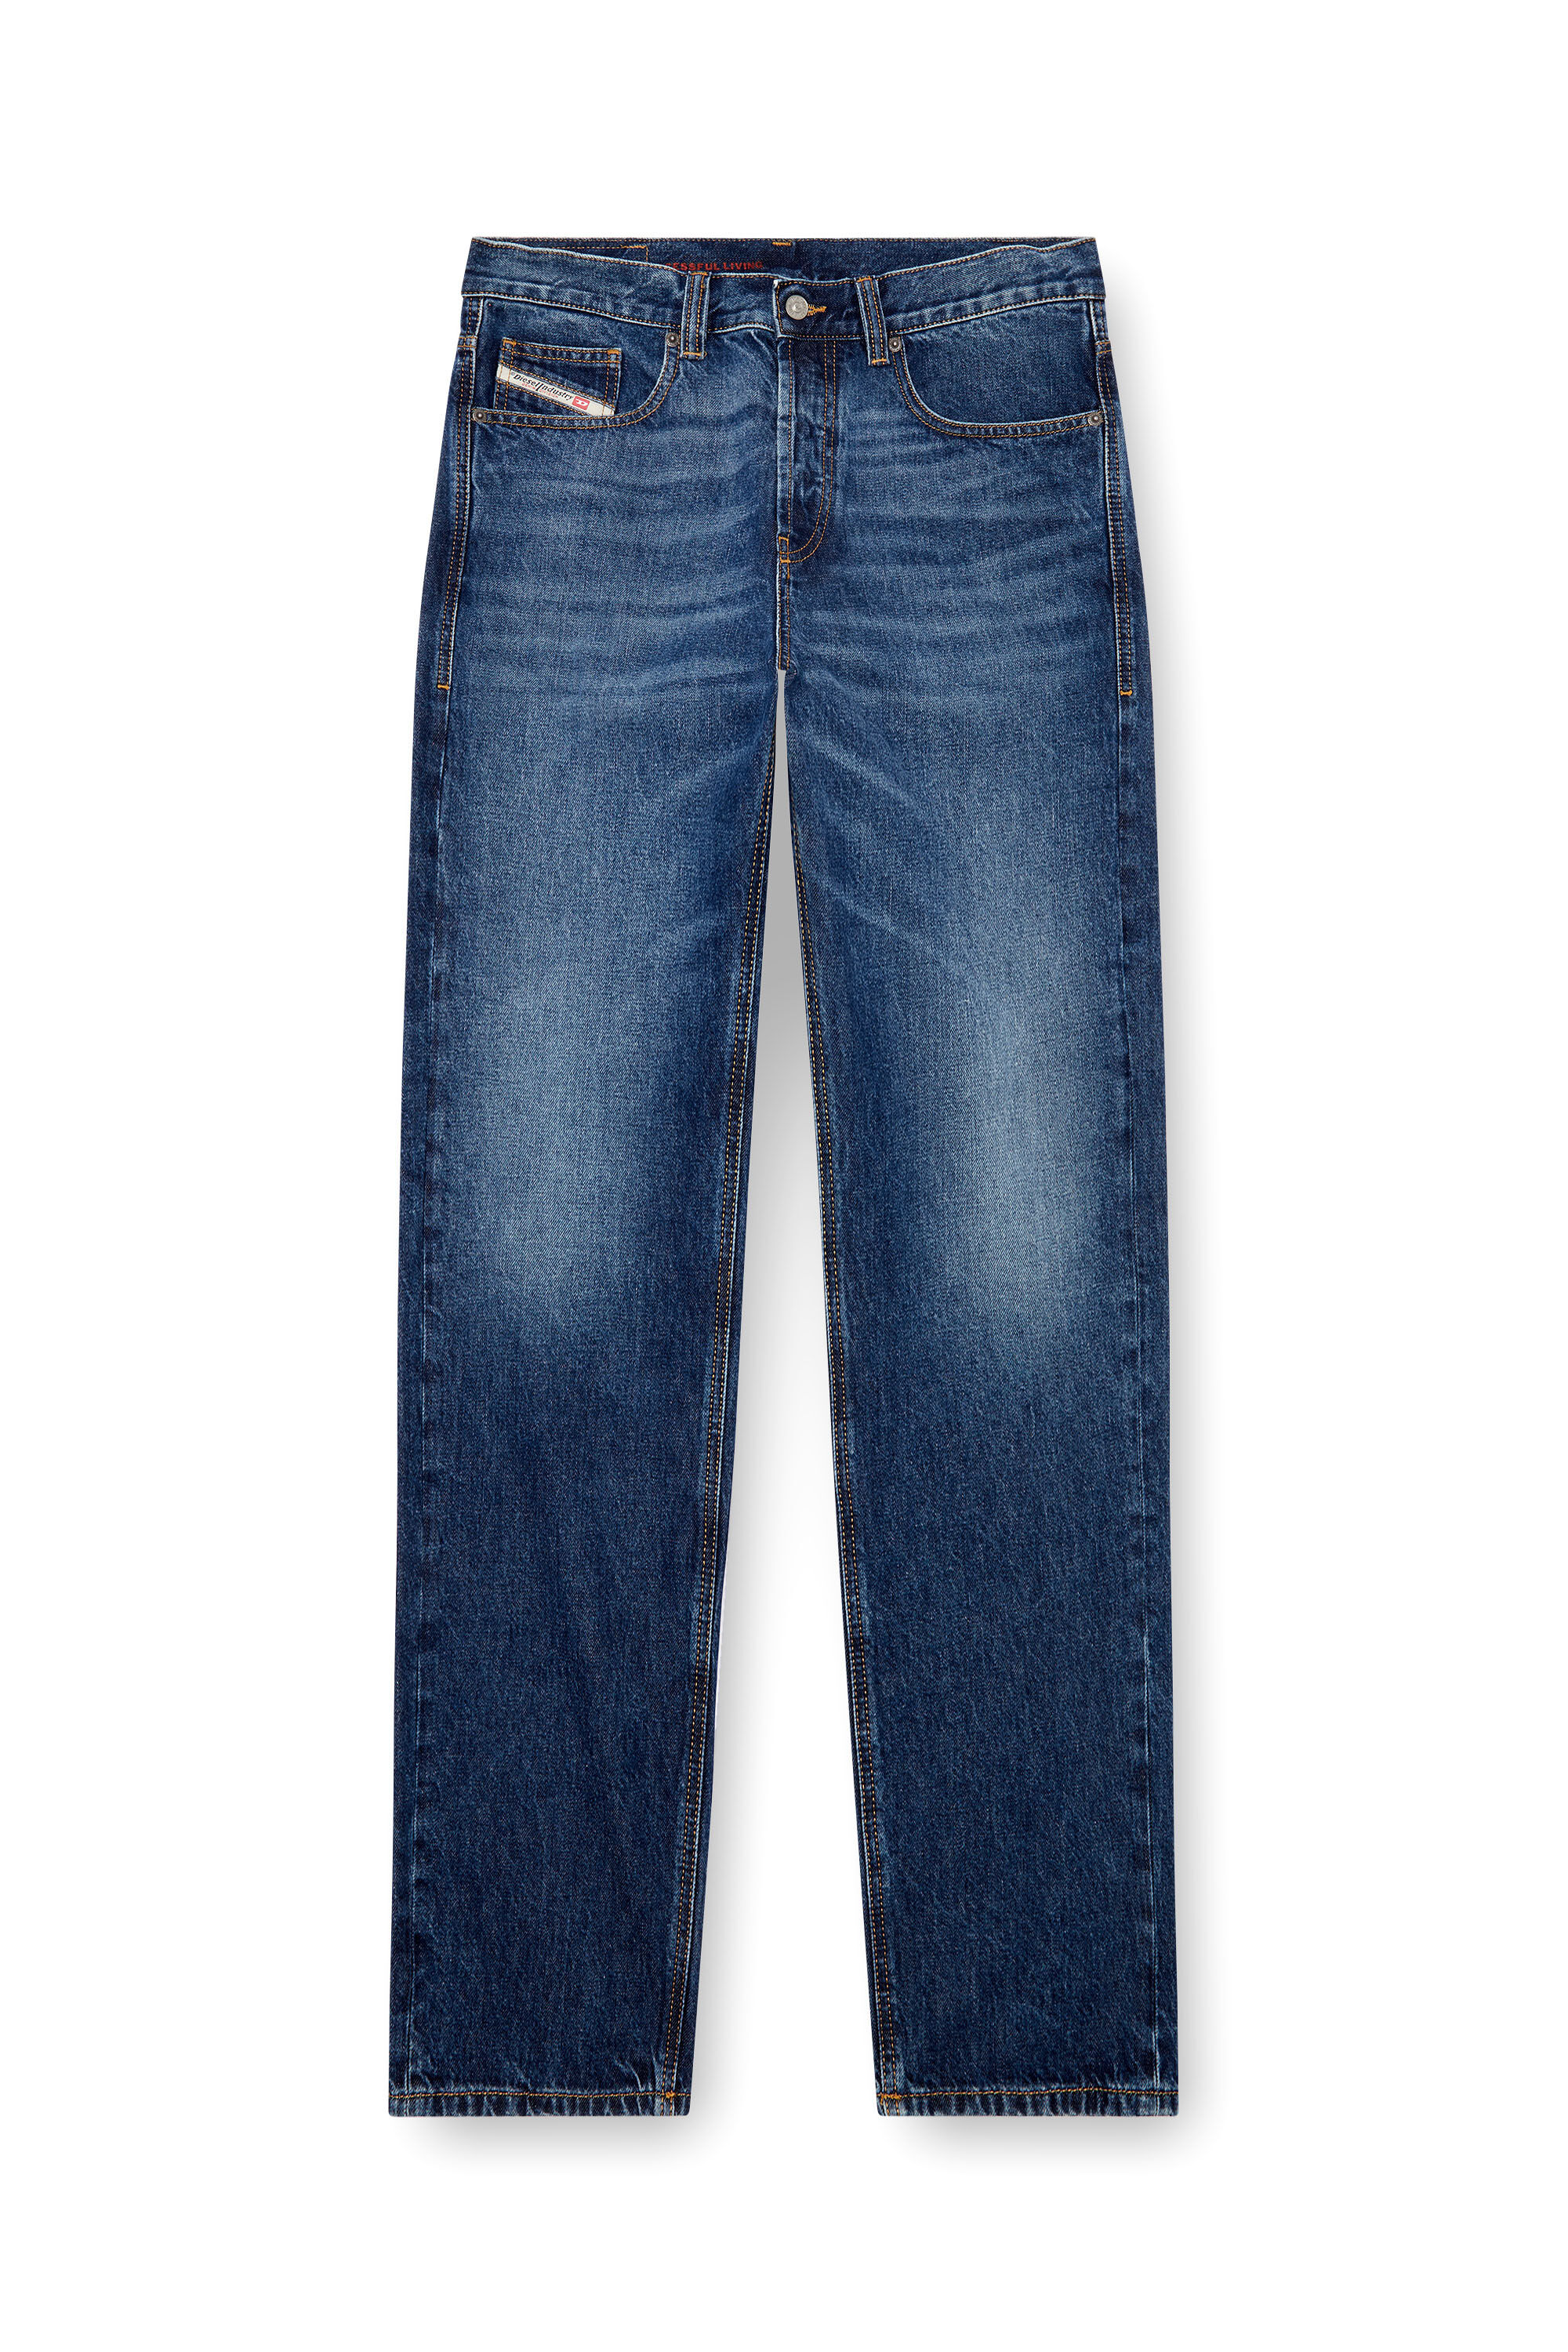 Diesel - Straight Jeans 2010 D-Macs 09I27, Hombre Straight Jeans - 2010 D-Macs in Azul marino - Image 2